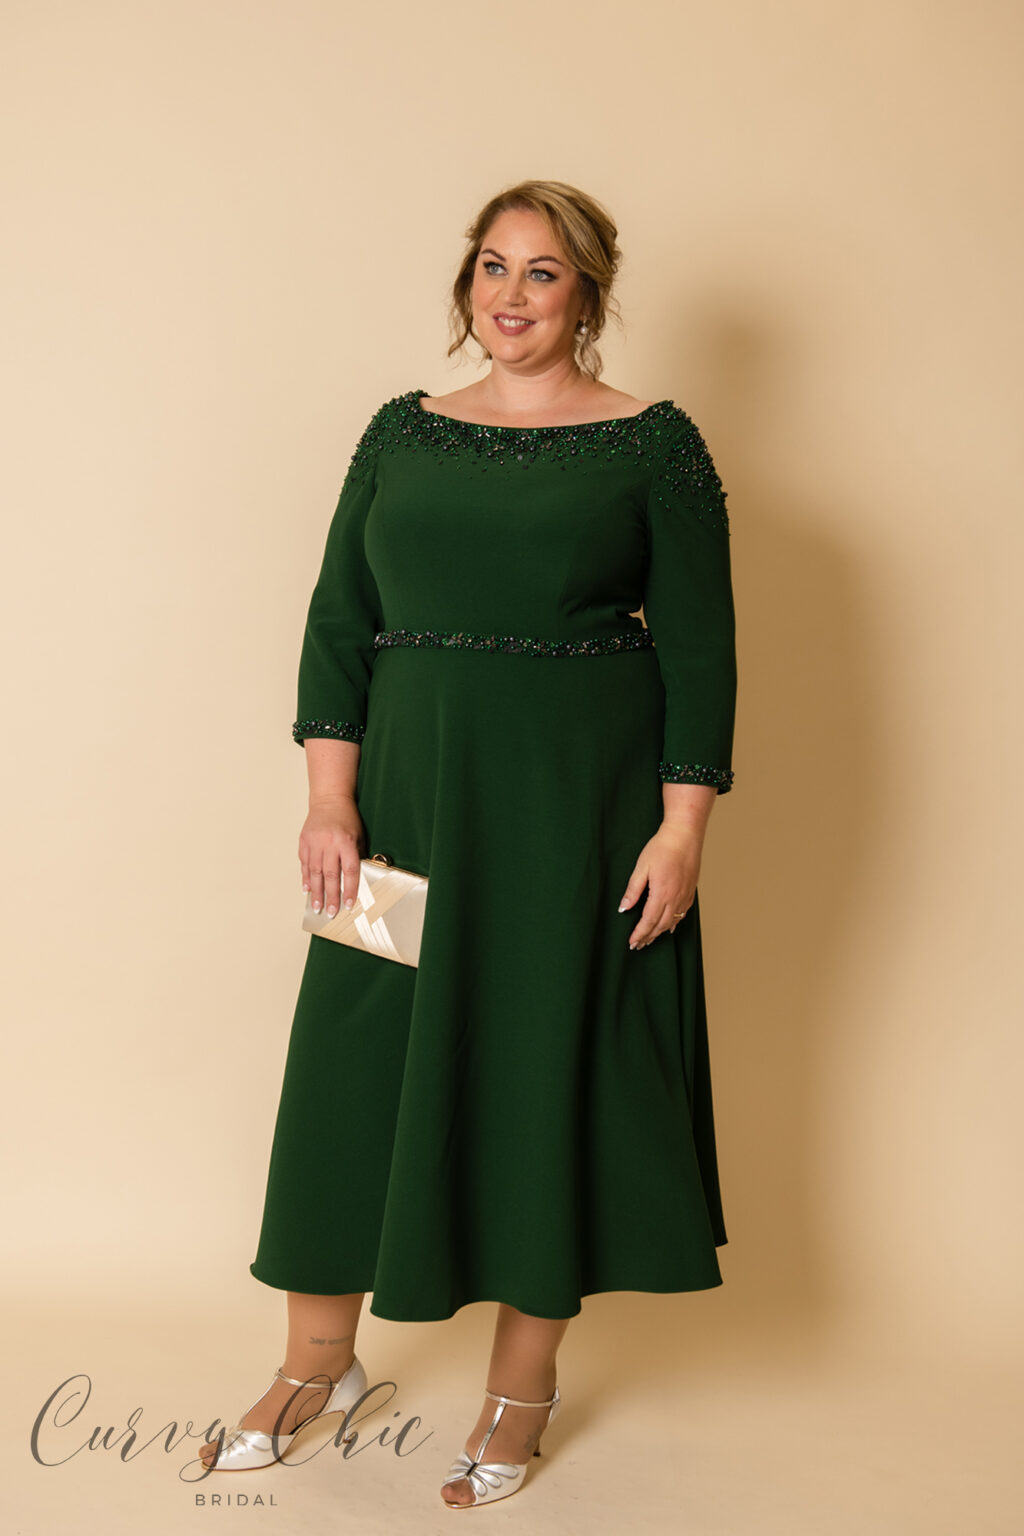 991930-emerald green-front-3